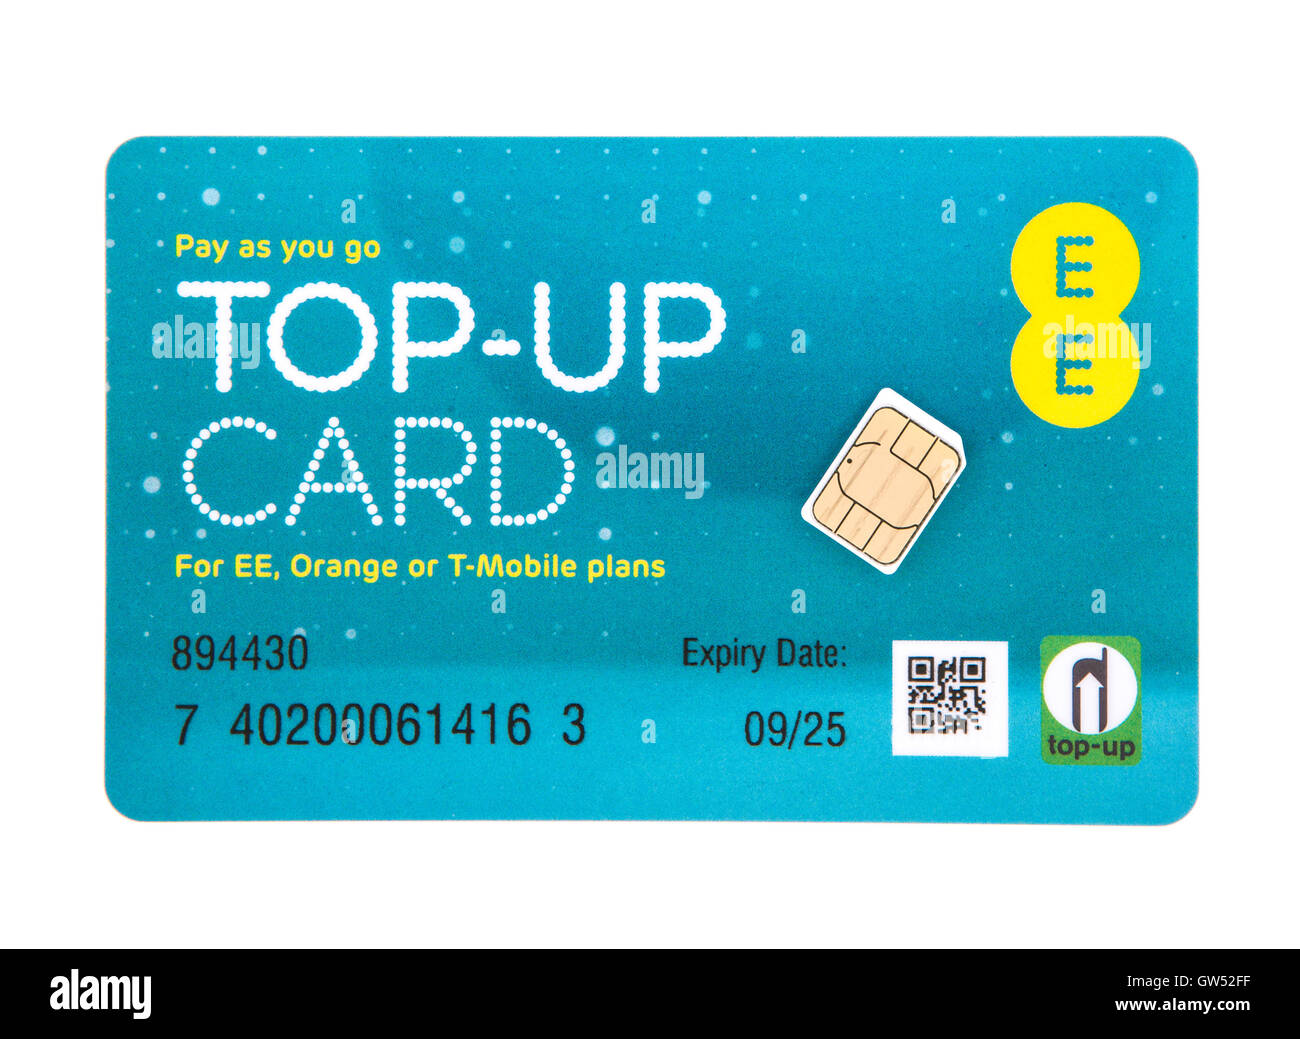 EE Pay as you go top-up card with SIM for EE, Orange or T-Mobile Services Stock Photo